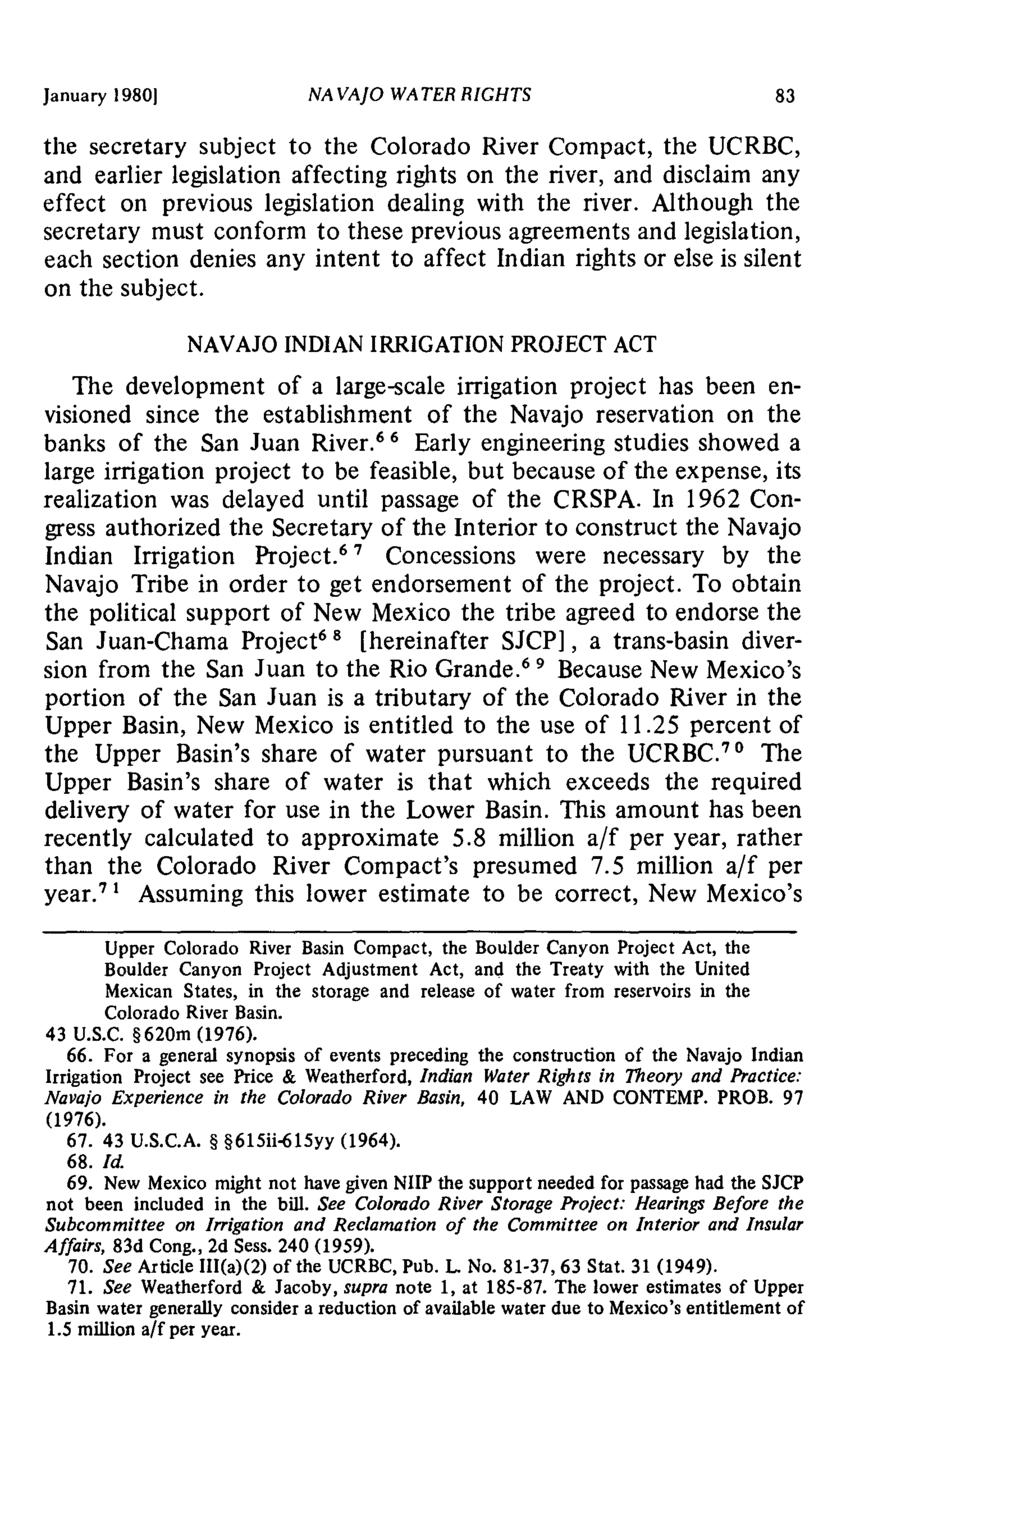 January 19801 NA VAJO WA TER RIGHTS the secretary subject to the Colorado River Compact, the UCRBC, and earlier legislation affecting rights on the river, and disclaim any effect on previous